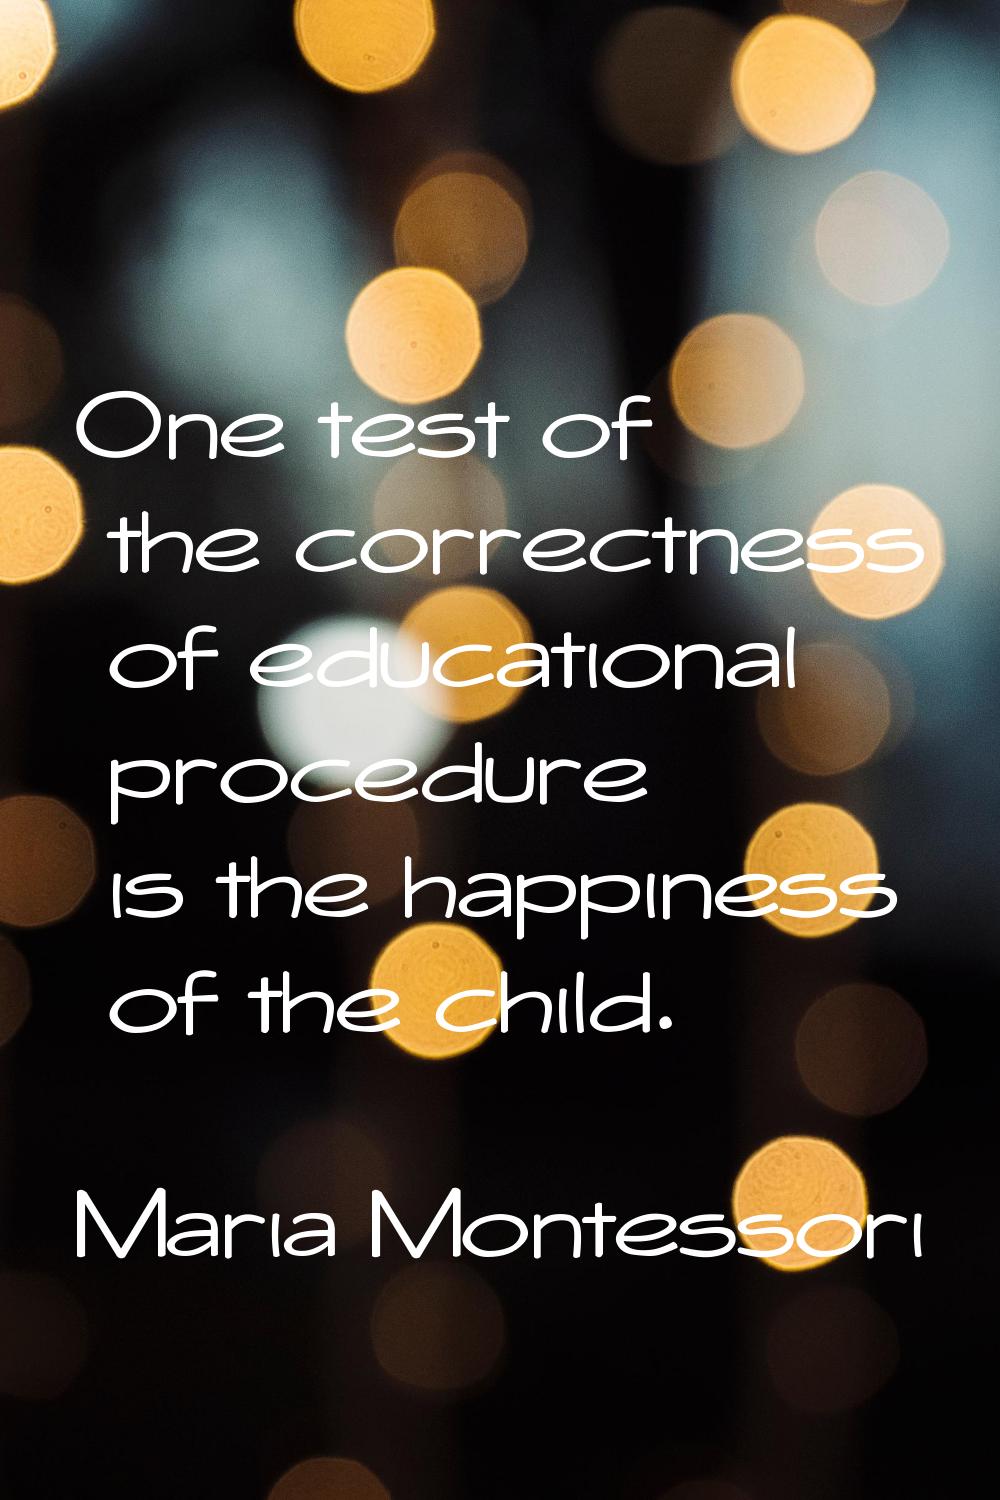 One test of the correctness of educational procedure is the happiness of the child.